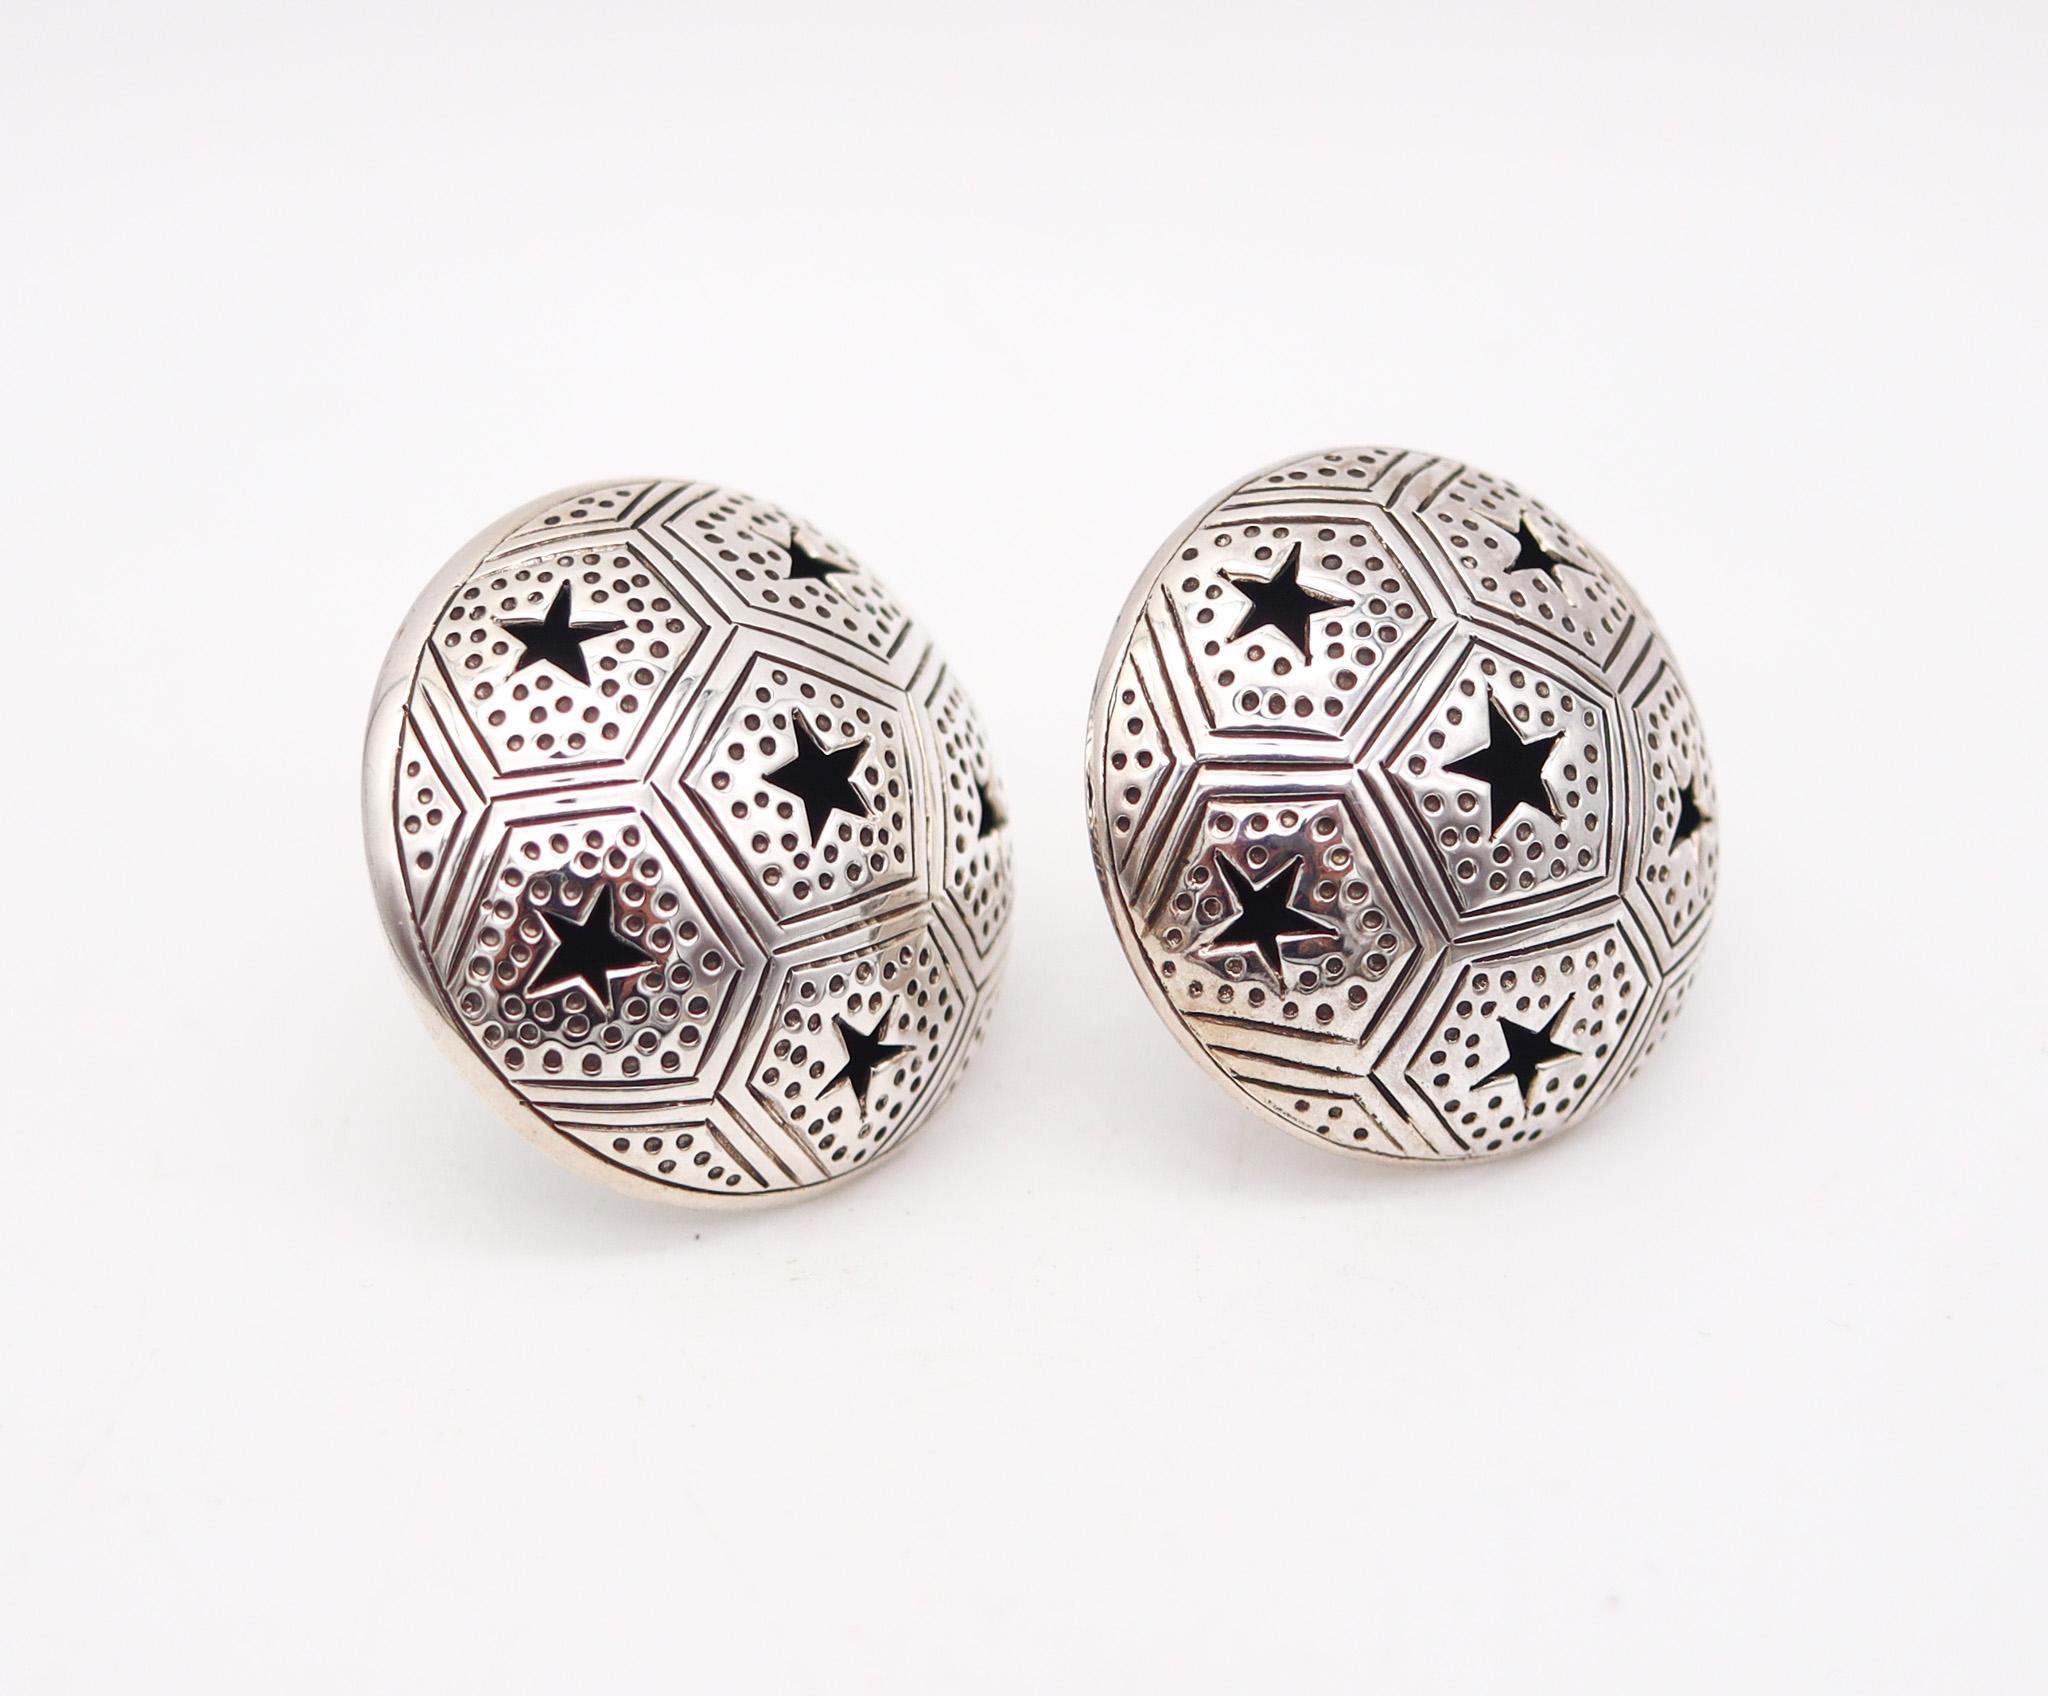 Pair of clips-on earrings designed by John Hardy.

Beautiful and unusual pair of clips-on earrings, created by the jeweler and designer Jonh Hardy. This pair has been crafted as a celestial dome with multiples stars in .925/.999 sterling silver with